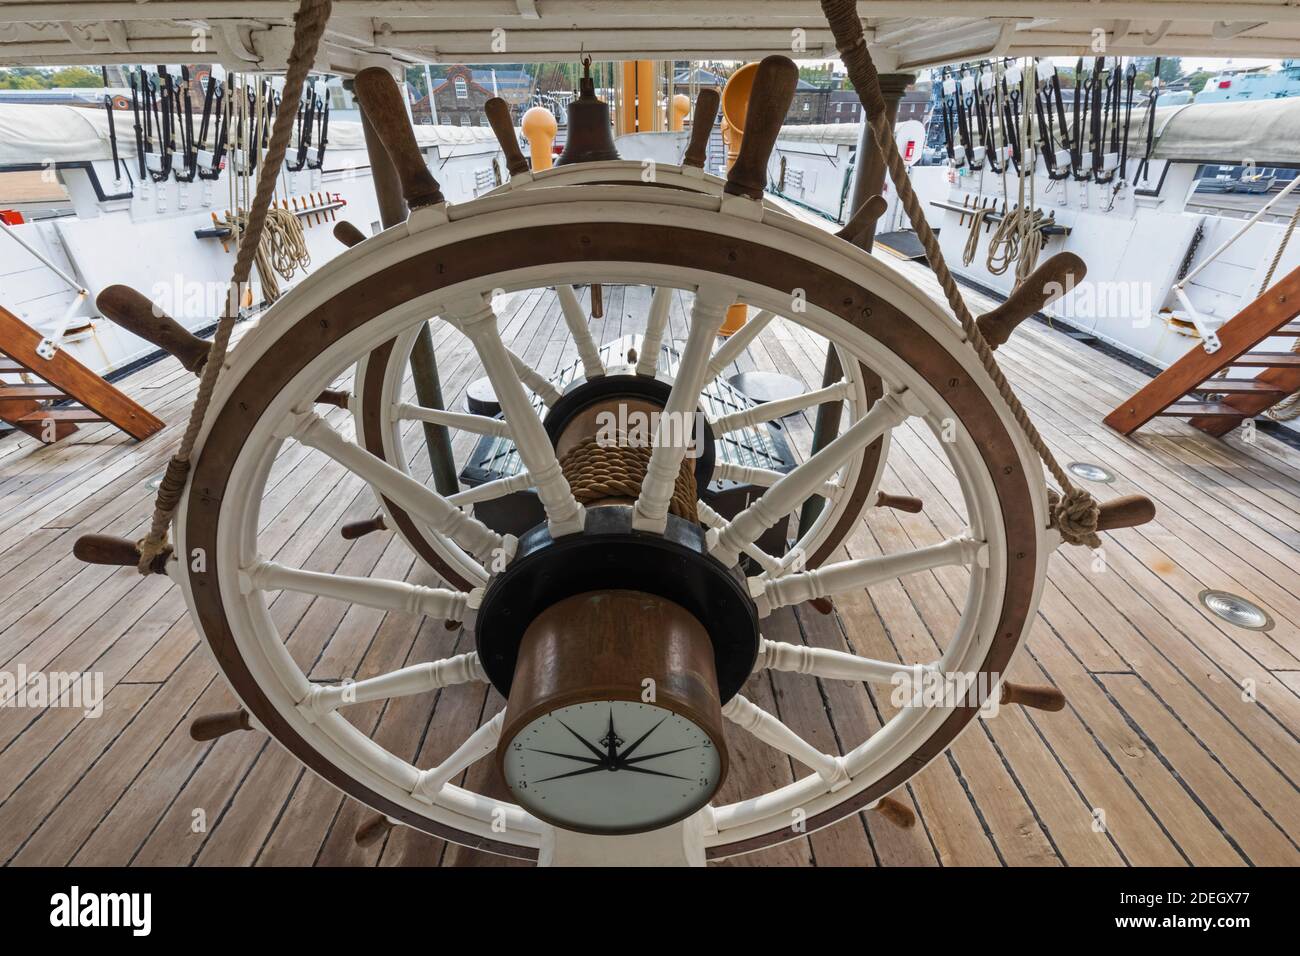 England, Kent, Chatham, The Historic Dockyard, The Steering Wheel of The Sailing Sloop HMS Gannet Stock Photo